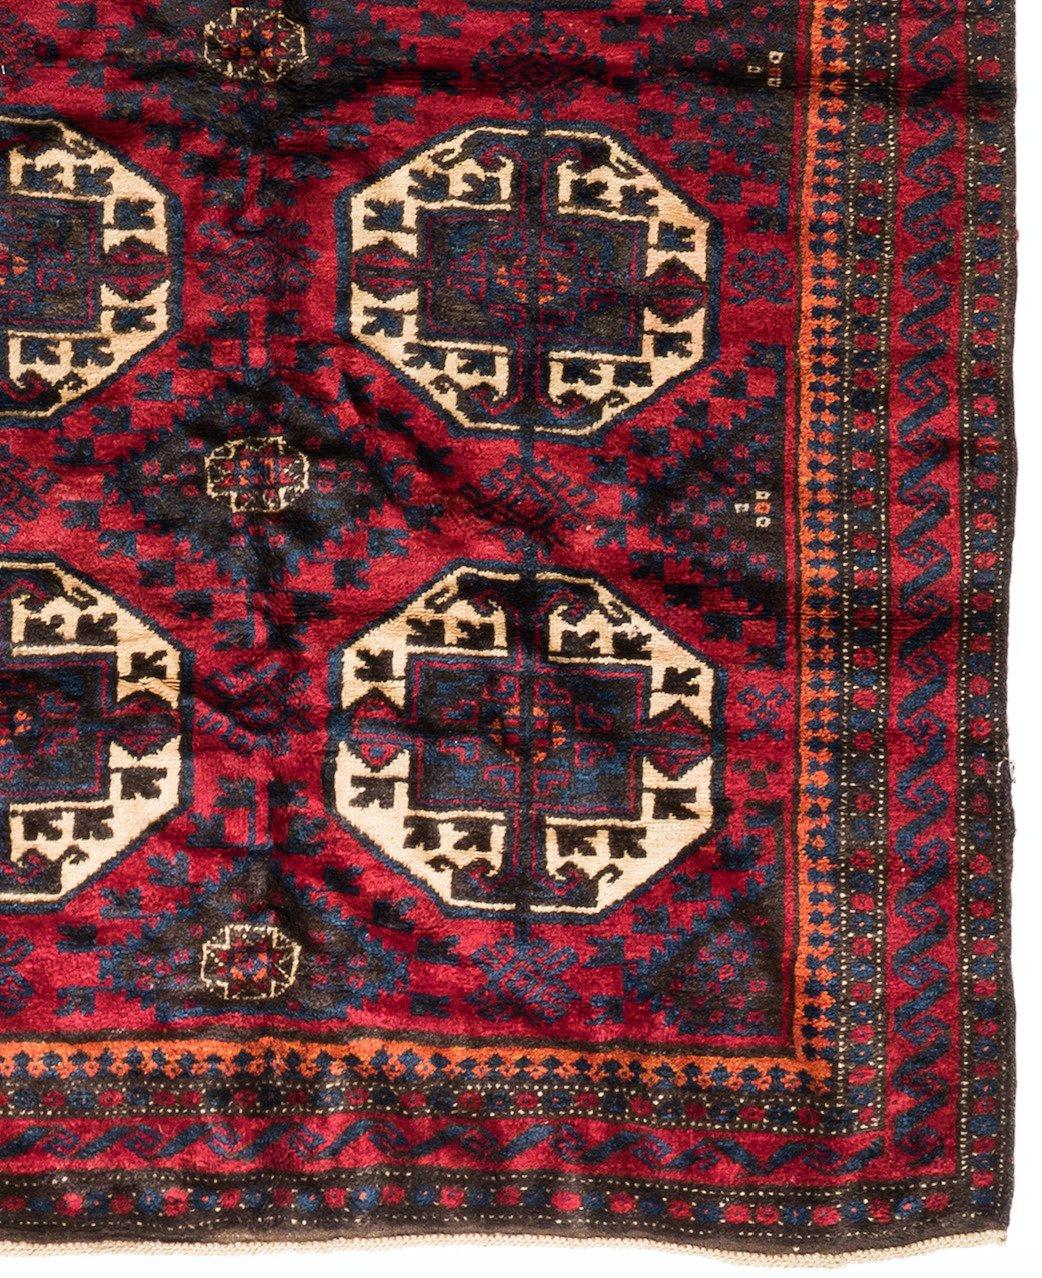 Antique Caucasian Burgundy Geometric Tribal Kazak Rug, c. 1940s In Good Condition For Sale In New York, NY